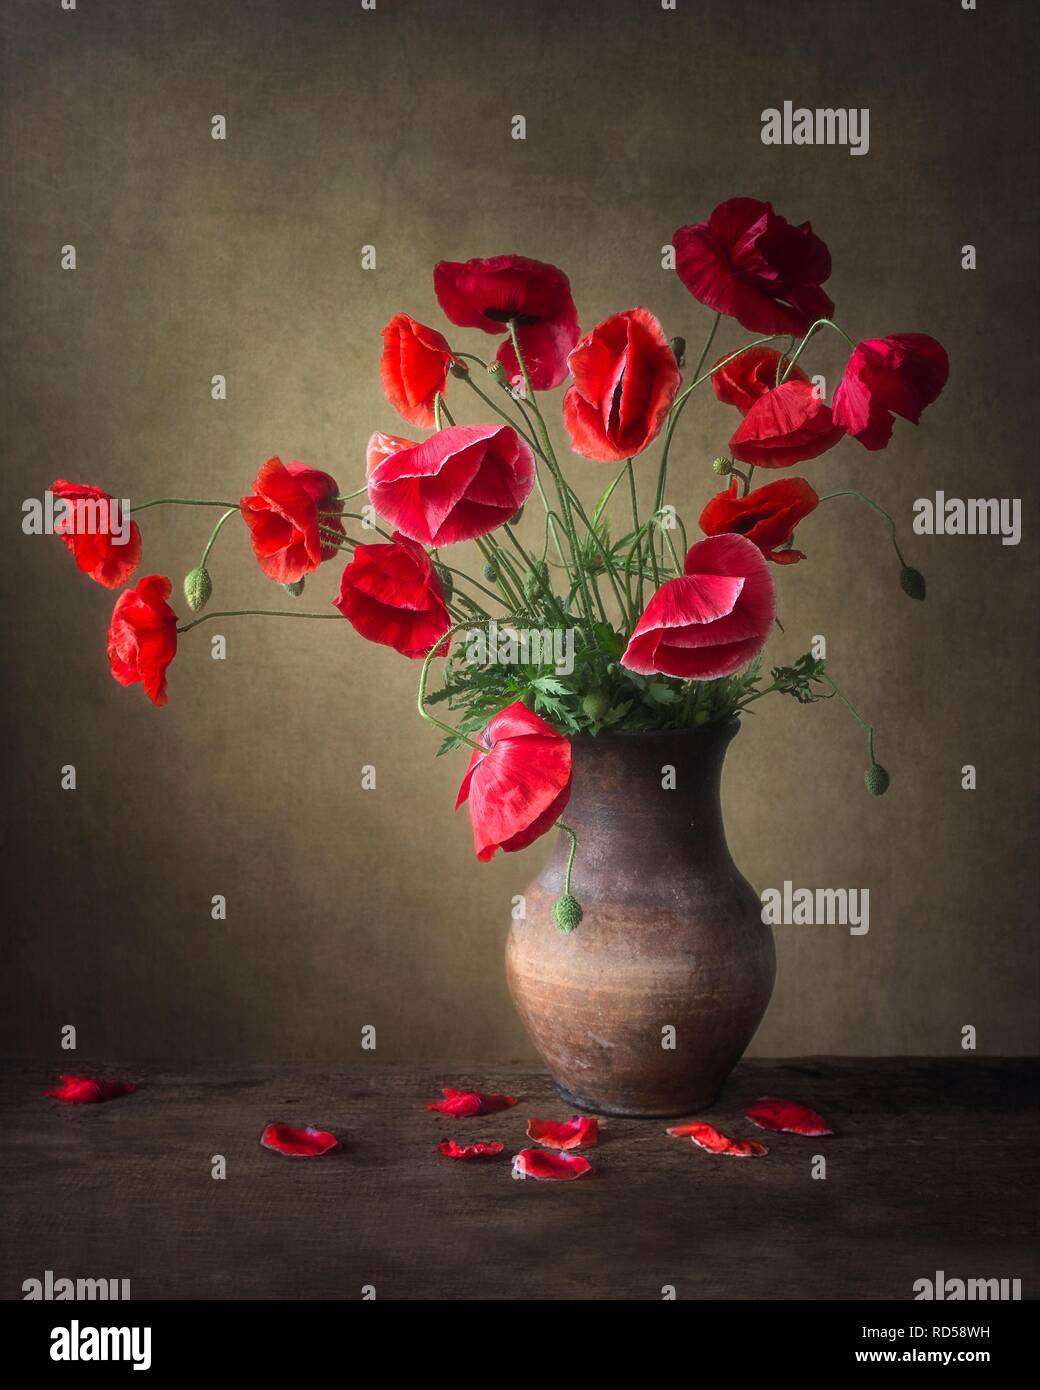 Still life with bouquet of red poppies Stock Photo